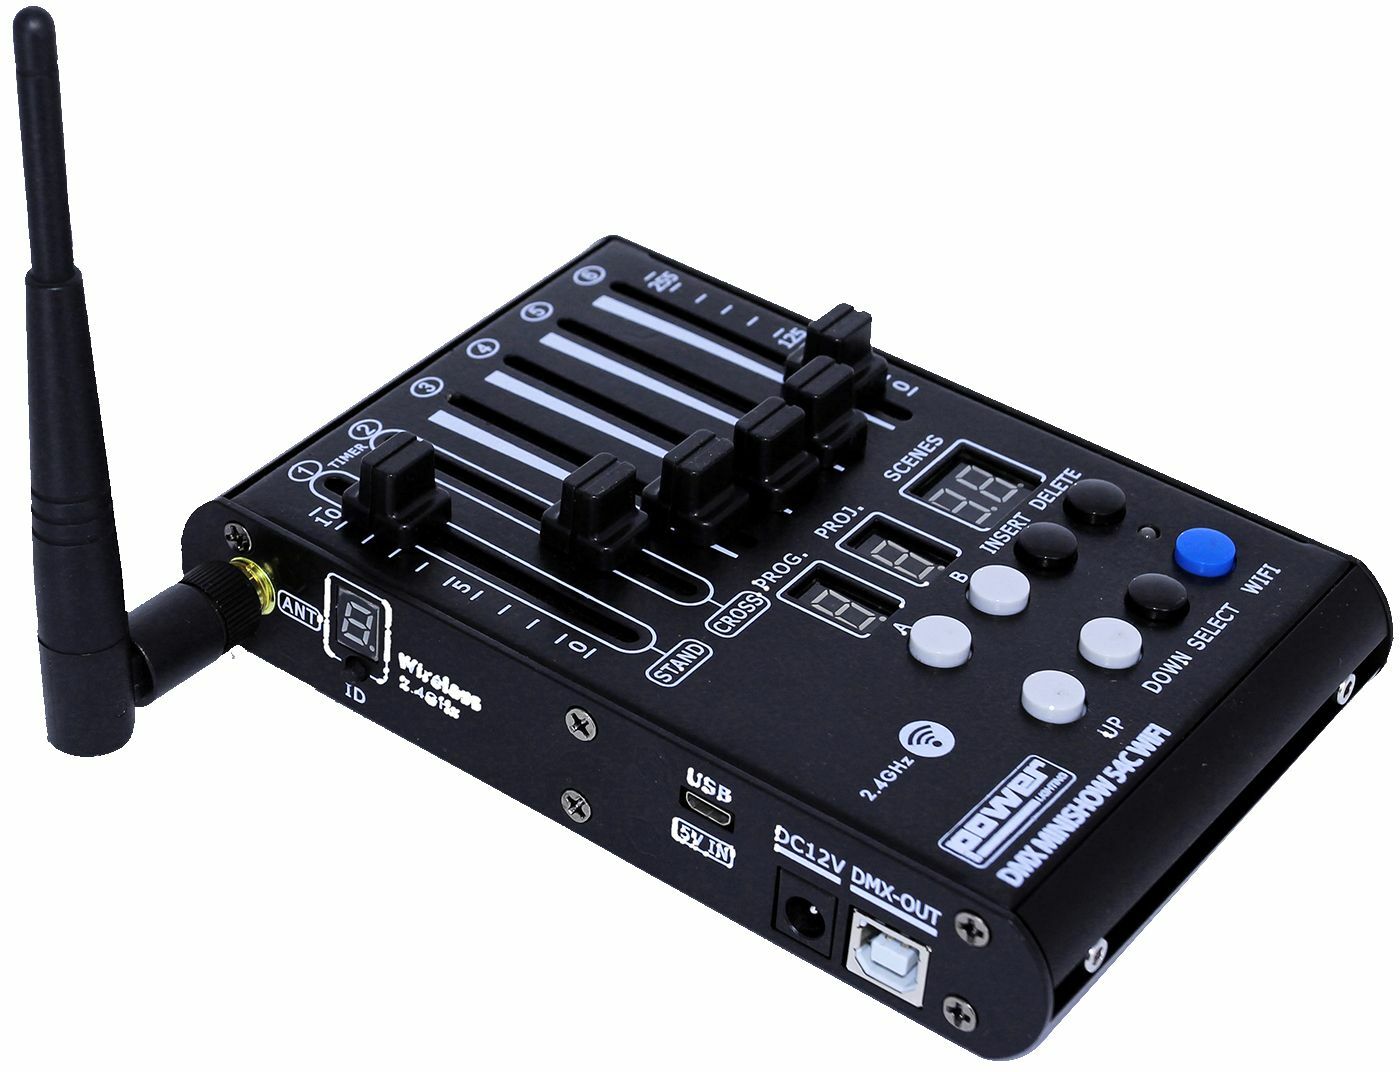 Sogetronic Dmx Minishow 54c Wifi - DMX controller - Main picture